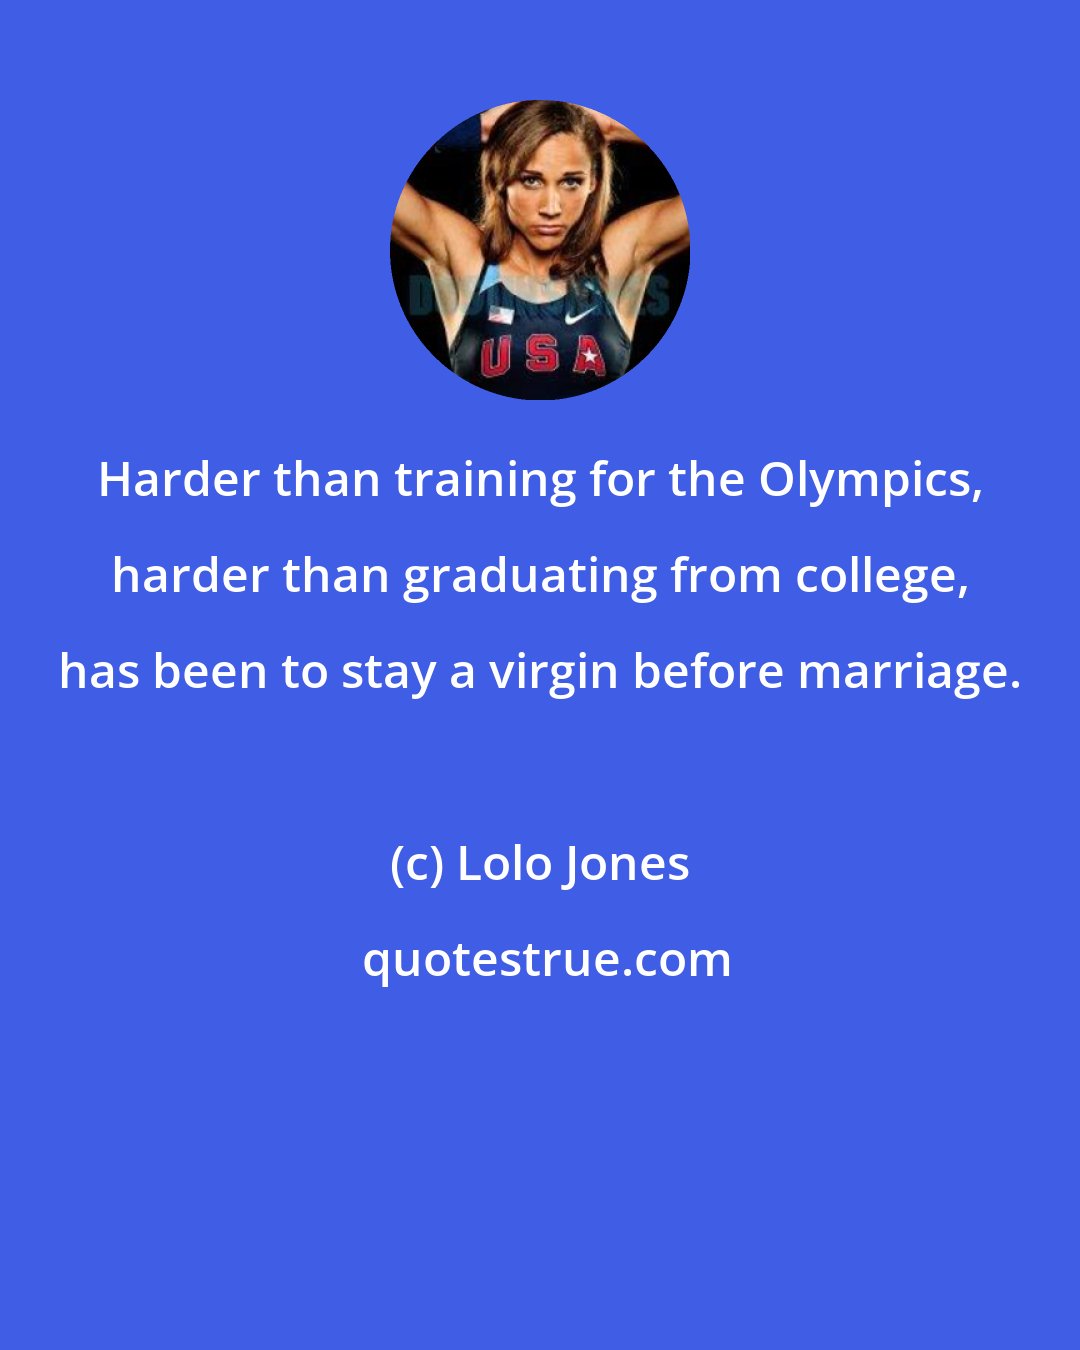 Lolo Jones: Harder than training for the Olympics, harder than graduating from college, has been to stay a virgin before marriage.